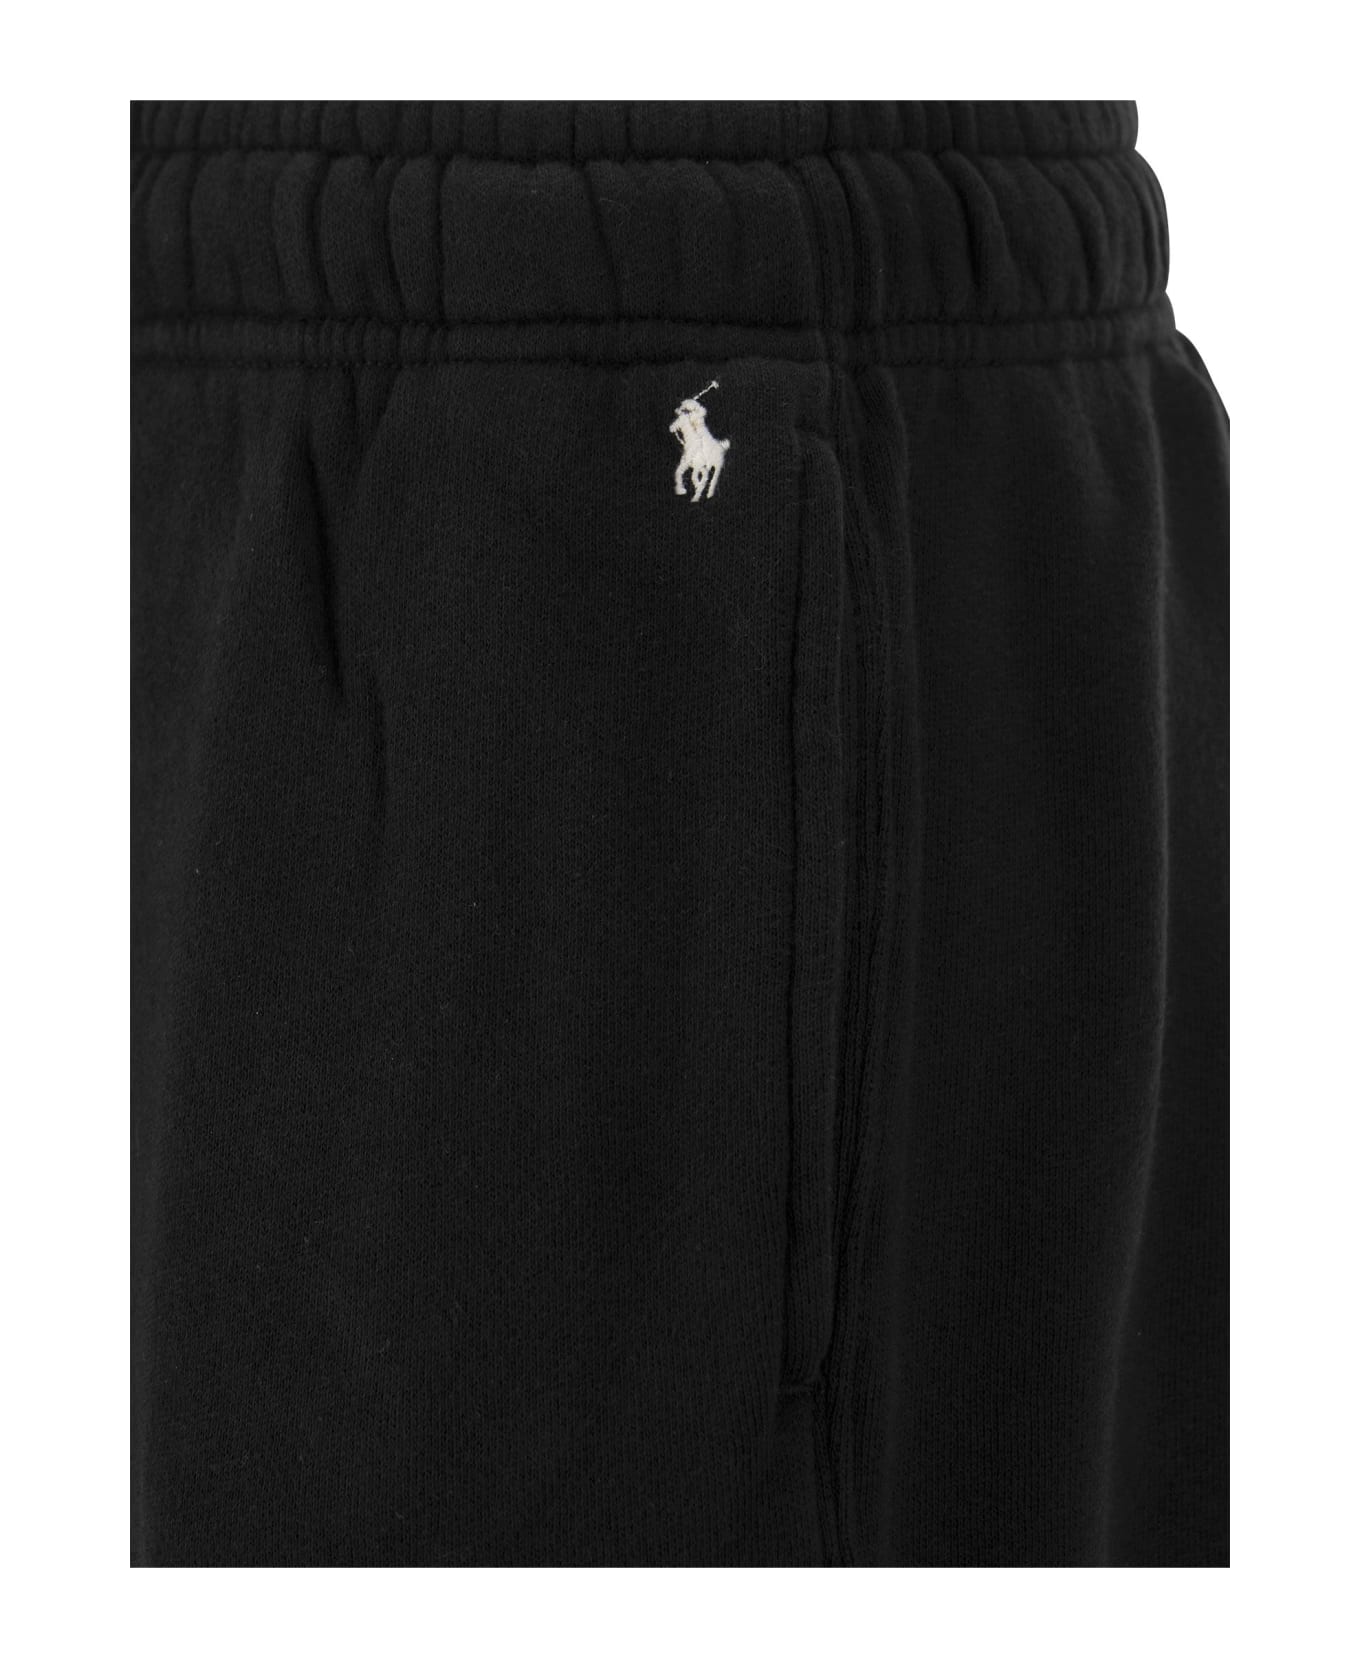 Polo Ralph Lauren Pony Embroidered Track Pants - Black